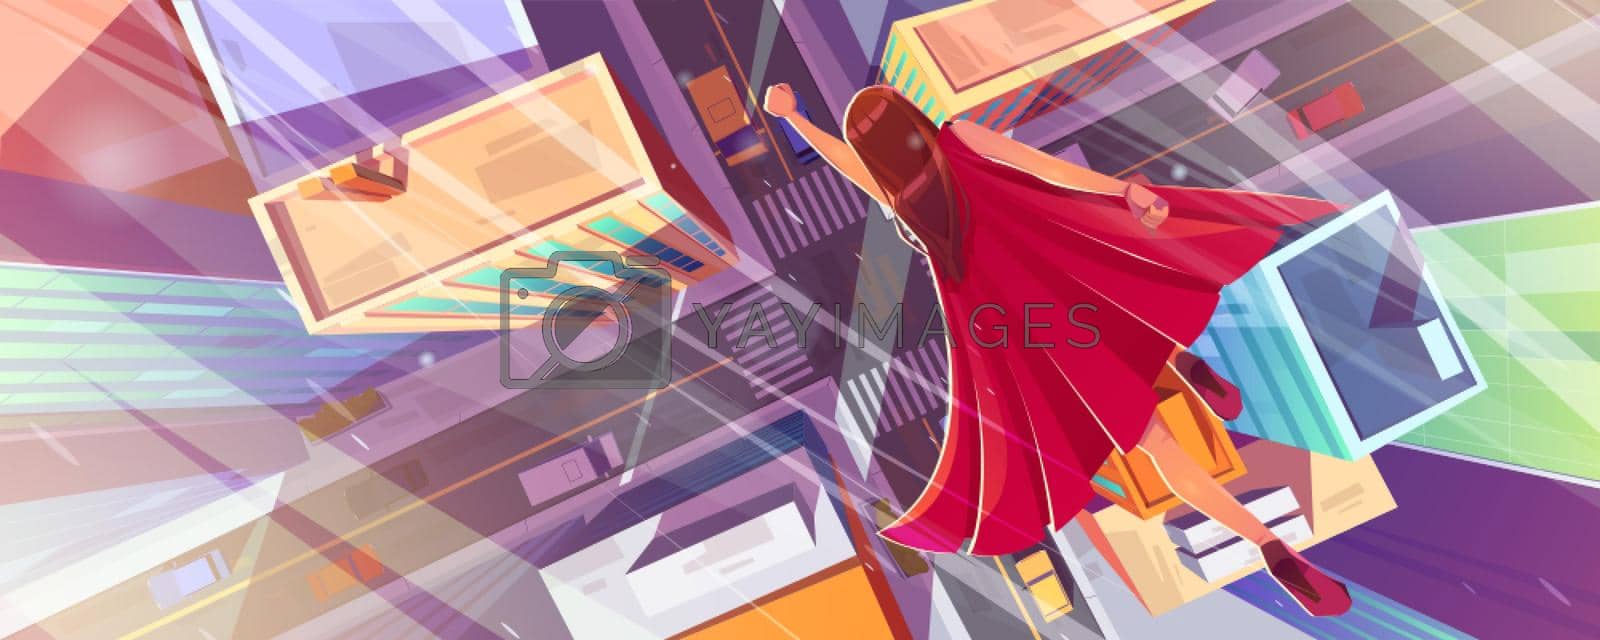 Royalty free image of Superhero woman fly above city street with houses by vectorart